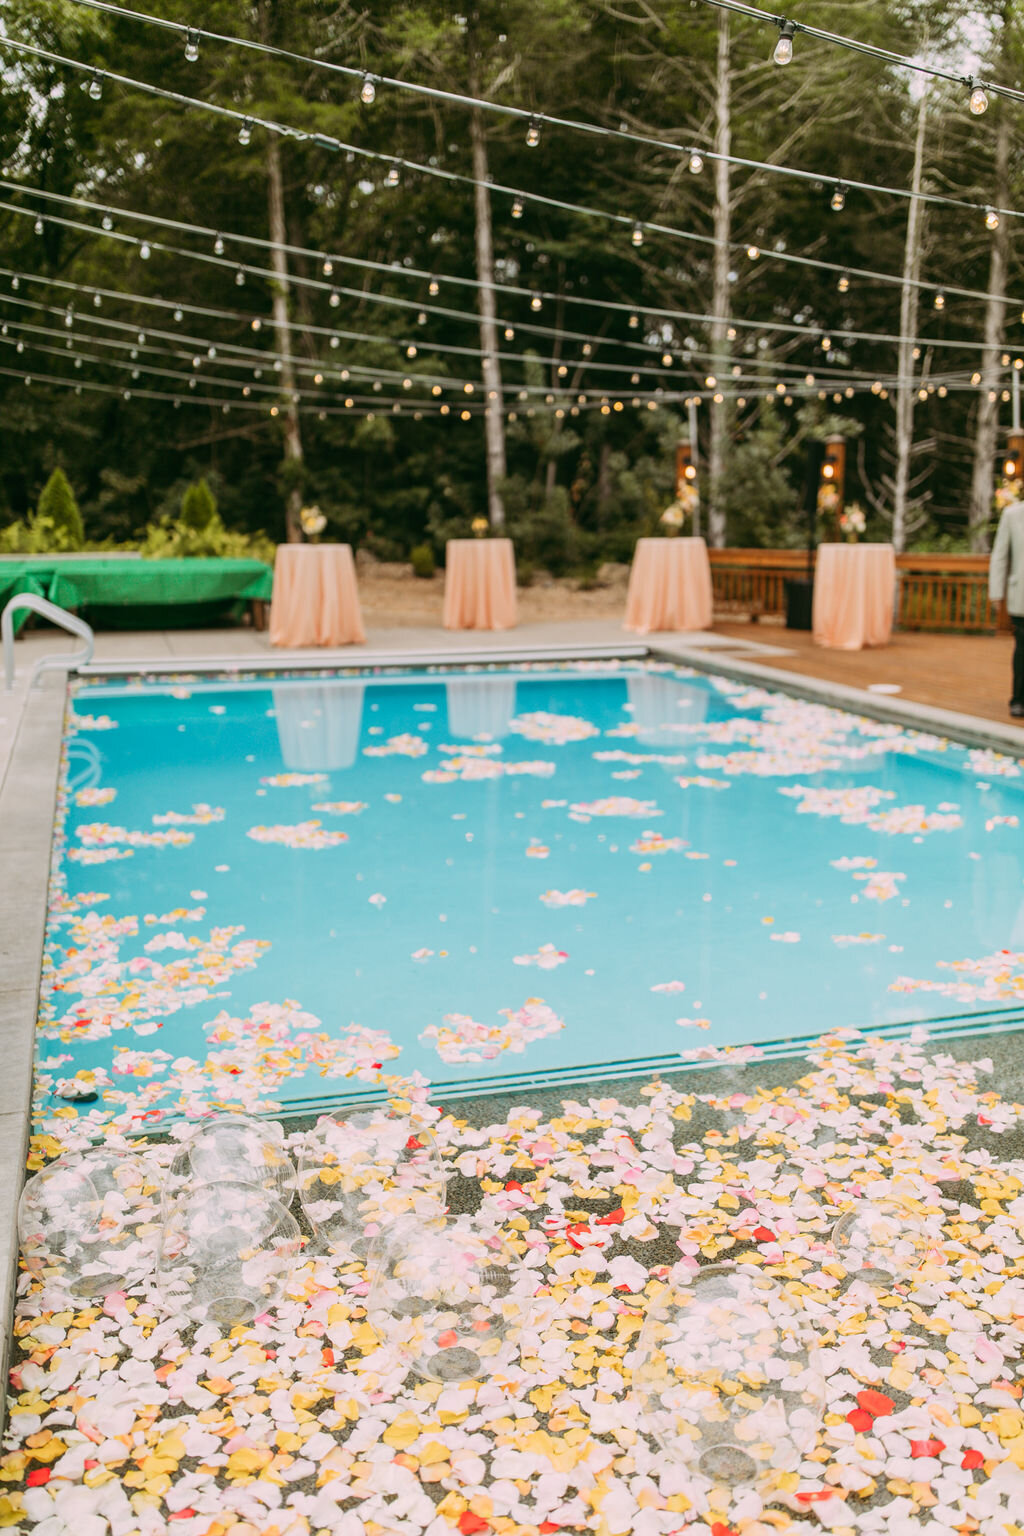 Floating rose petals in the pool